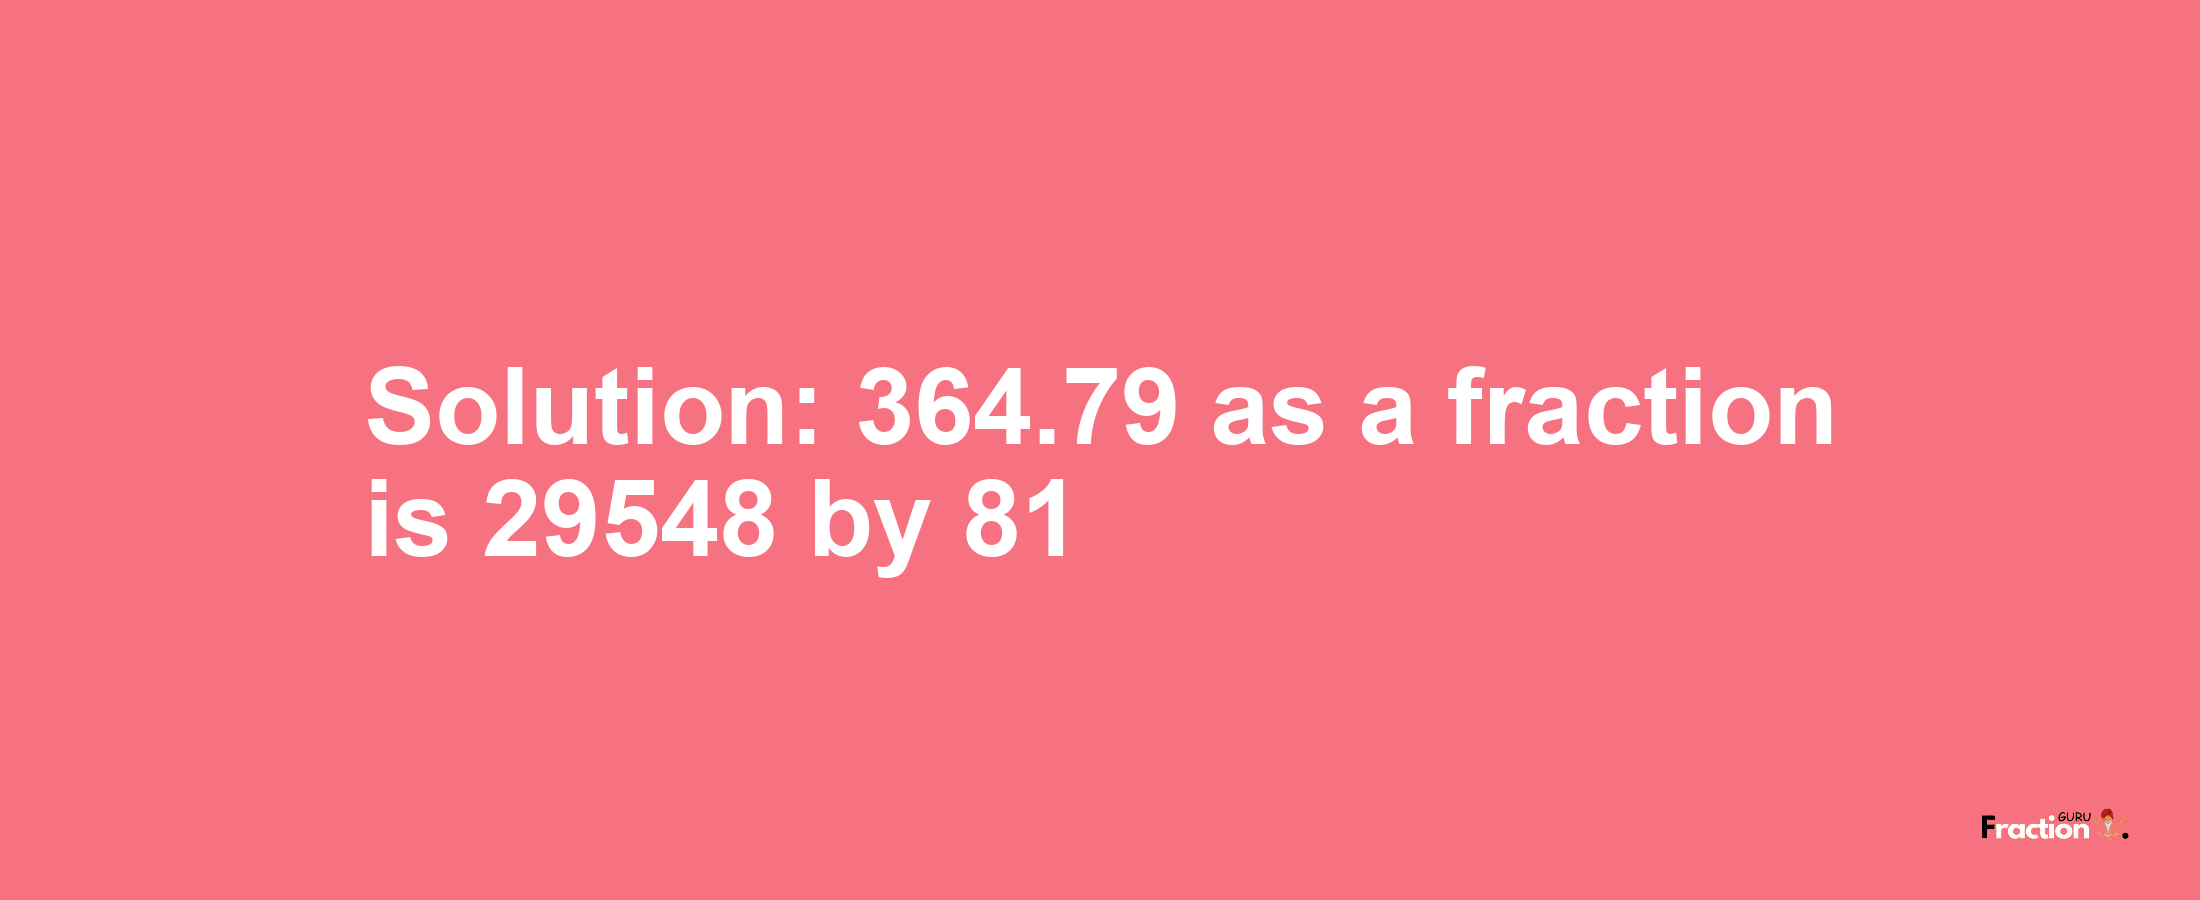 Solution:364.79 as a fraction is 29548/81